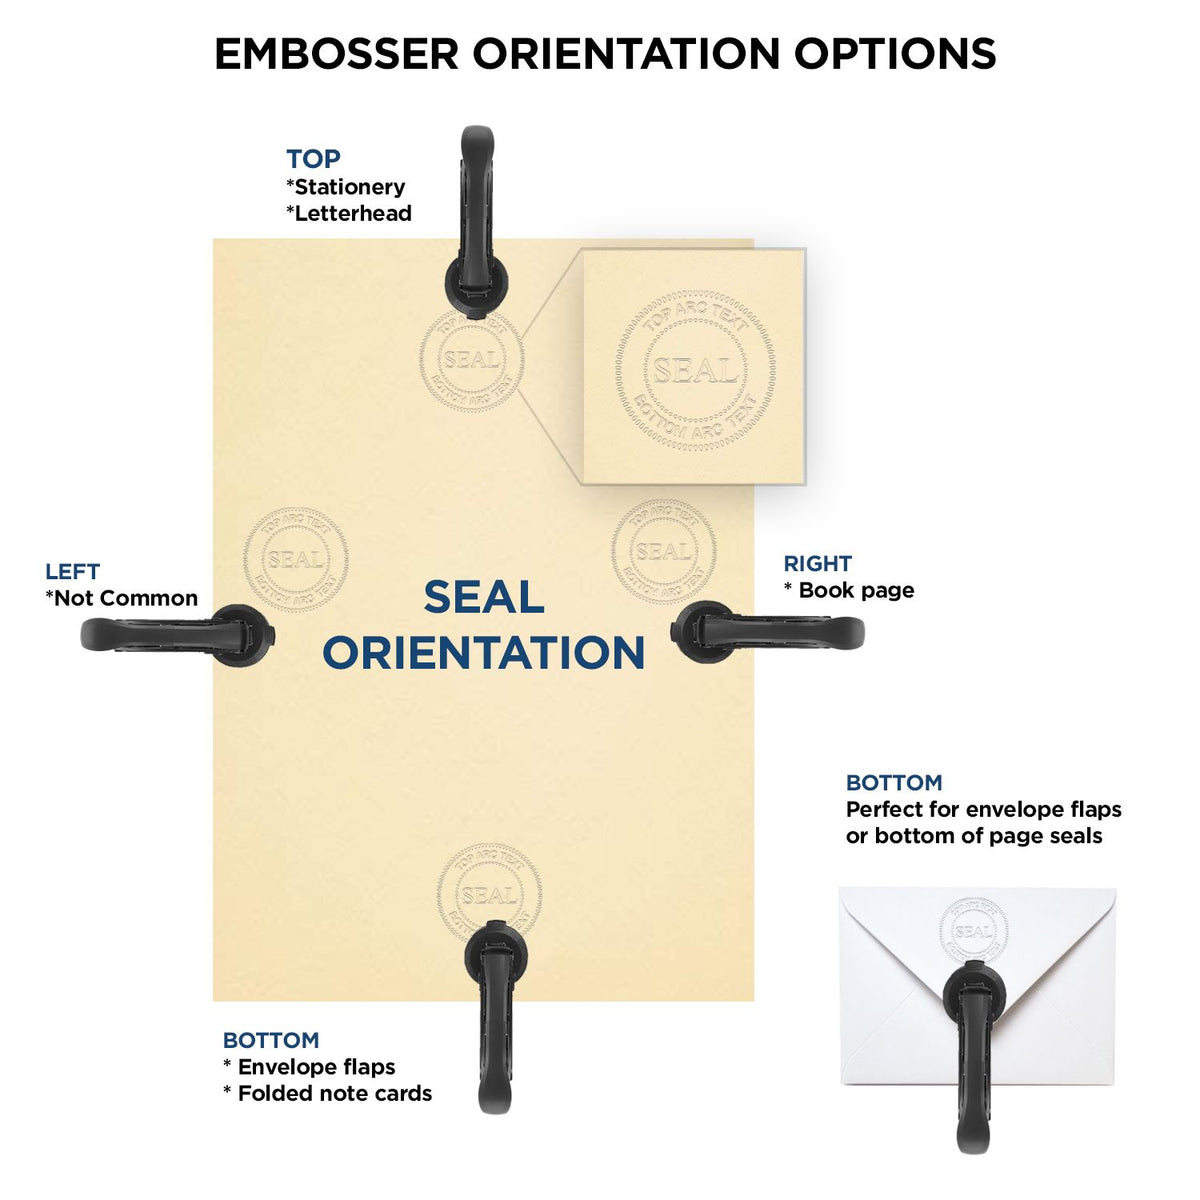 An infographic for the Mississippi Engineer Desk Seal showing embosser orientation, this is showing examples of a top, bottom, right and left insert.